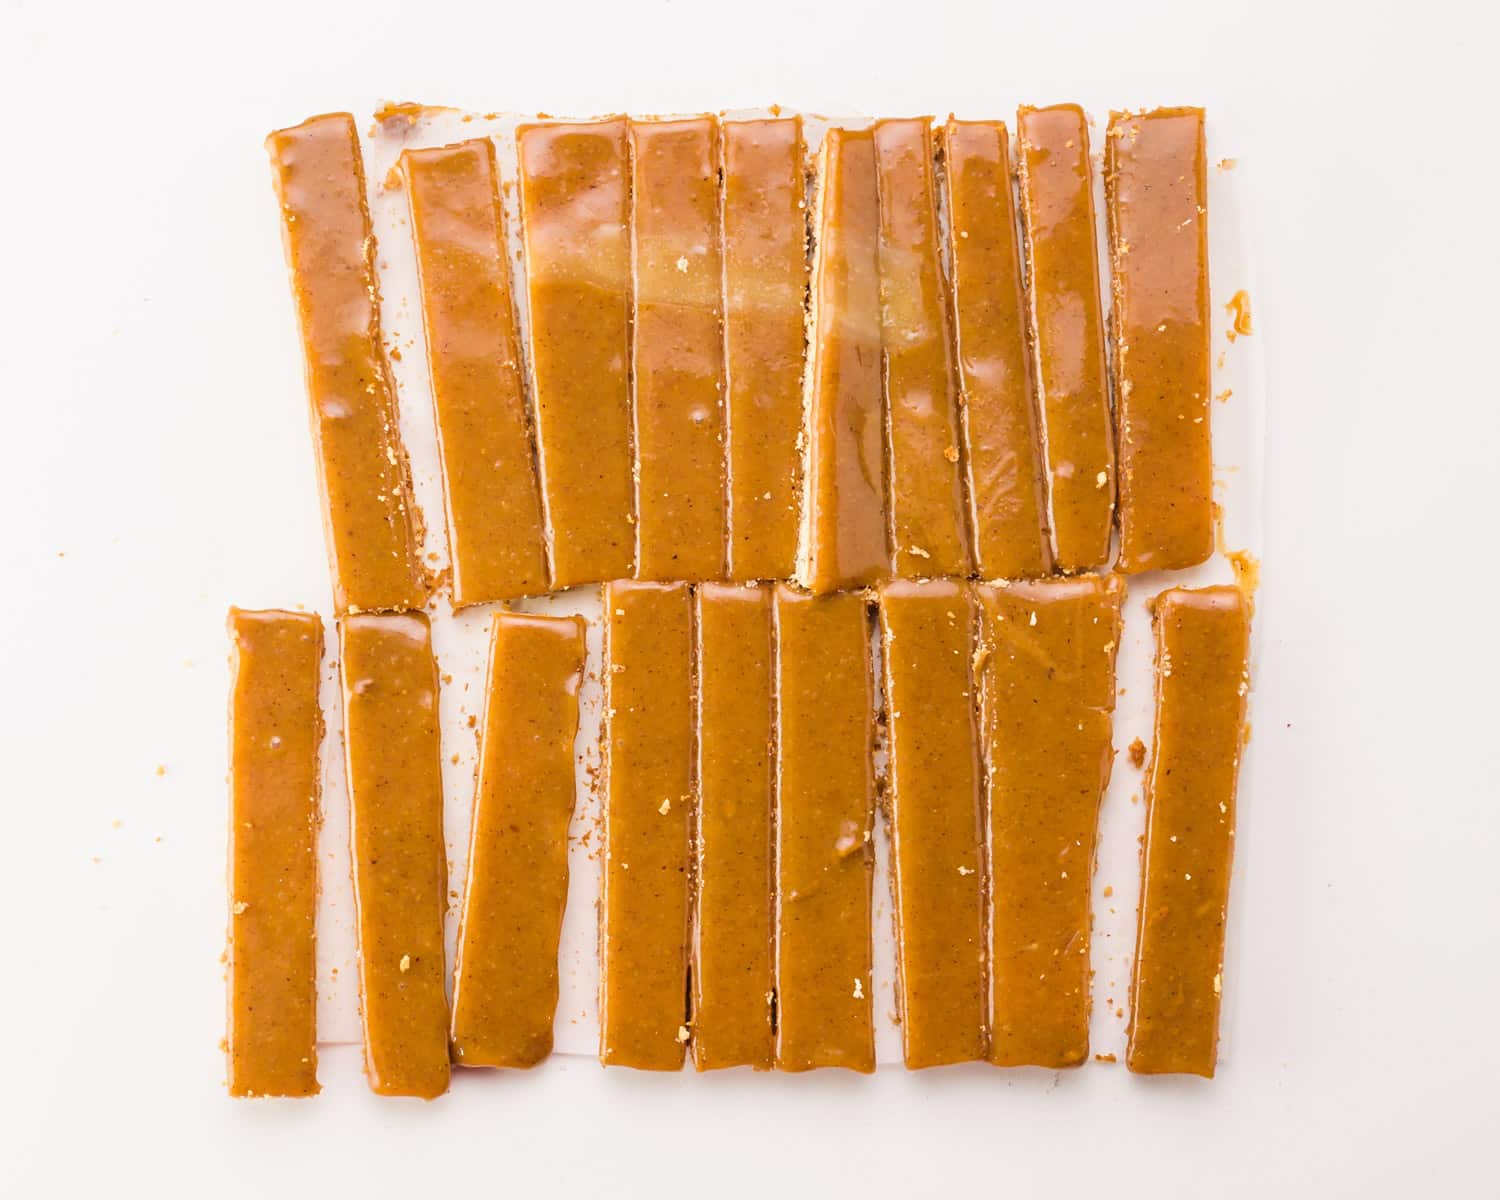 Cookies toped with caramel have been cut into bars.